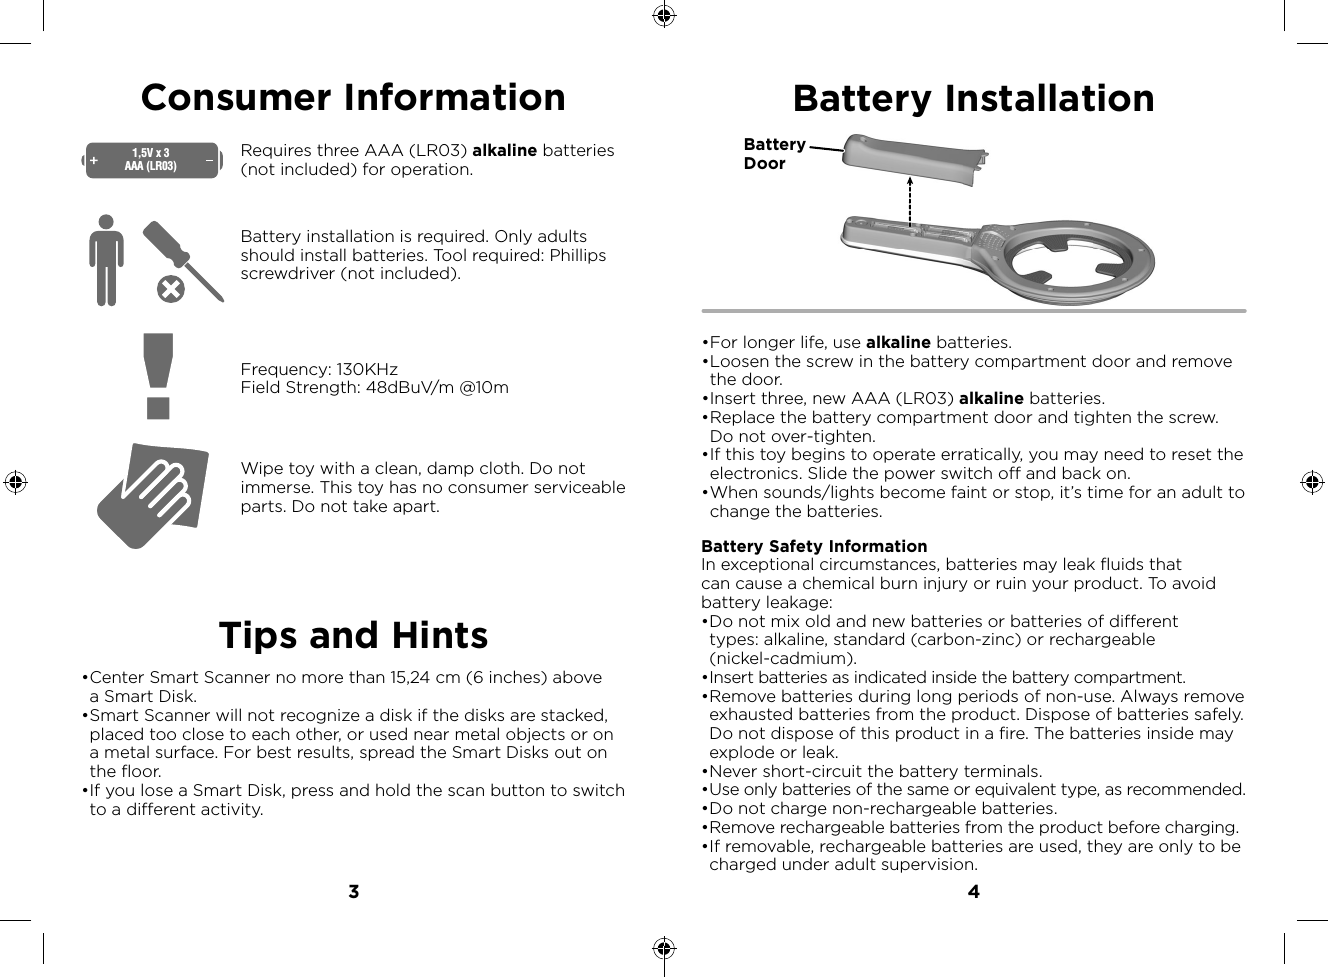 3 4Consumer InformationTips and HintsWipe toy with a clean, damp cloth. Do not immerse. This toy has no consumer serviceable parts. Do not take apart. Requires three AAA (LR03) alkaline batteries (not included) for operation.Battery installation is required. Only adults should install batteries. Tool required: Phillips screwdriver (not included). Frequency: 130KHzField Strength: 48dBuV/m @10m1,5V x 3AAA (LR03)• Center Smart Scanner no more than 15,24 cm (6 inches) above a Smart Disk.• Smart Scanner will not recognize a disk if the disks are stacked, placed too close to each other, or used near metal objects or on a metal surface. For best results, spread the Smart Disks out on the floor.• If you lose a Smart Disk, press and hold the scan button to switch to a different activity.Battery Installation• For longer life, use alkaline batteries. • Loosen the screw in the battery compartment door and remove the door.• Insert three, new AAA (LR03) alkaline batteries. • Replace the battery compartment door and tighten the screw. Do not over-tighten. • If this toy begins to operate erratically, you may need to reset the electronics. Slide the power switch off and back on. • When sounds/lights become faint or stop, it’s time for an adult to change the batteries.Battery Safety InformationIn exceptional circumstances, batteries may leak fluids that can cause a chemical burn injury or ruin your product. To avoid battery leakage:• Do not mix old and new batteries or batteries of different types: alkaline, standard (carbon-zinc) or rechargeable (nickel-cadmium).• Insert batteries as indicated inside the battery compartment.• Remove batteries during long periods of non-use. Always remove exhausted batteries from the product. Dispose of batteries safely. Do not dispose of this product in a fire. The batteries inside may explode or leak.• Never short-circuit the battery terminals.• Use only batteries of the same or equivalent type, as recommended.• Do not charge non-rechargeable batteries.• Remove rechargeable batteries from the product before charging.• If removable, rechargeable batteries are used, they are only to be charged under adult supervision. Battery Door